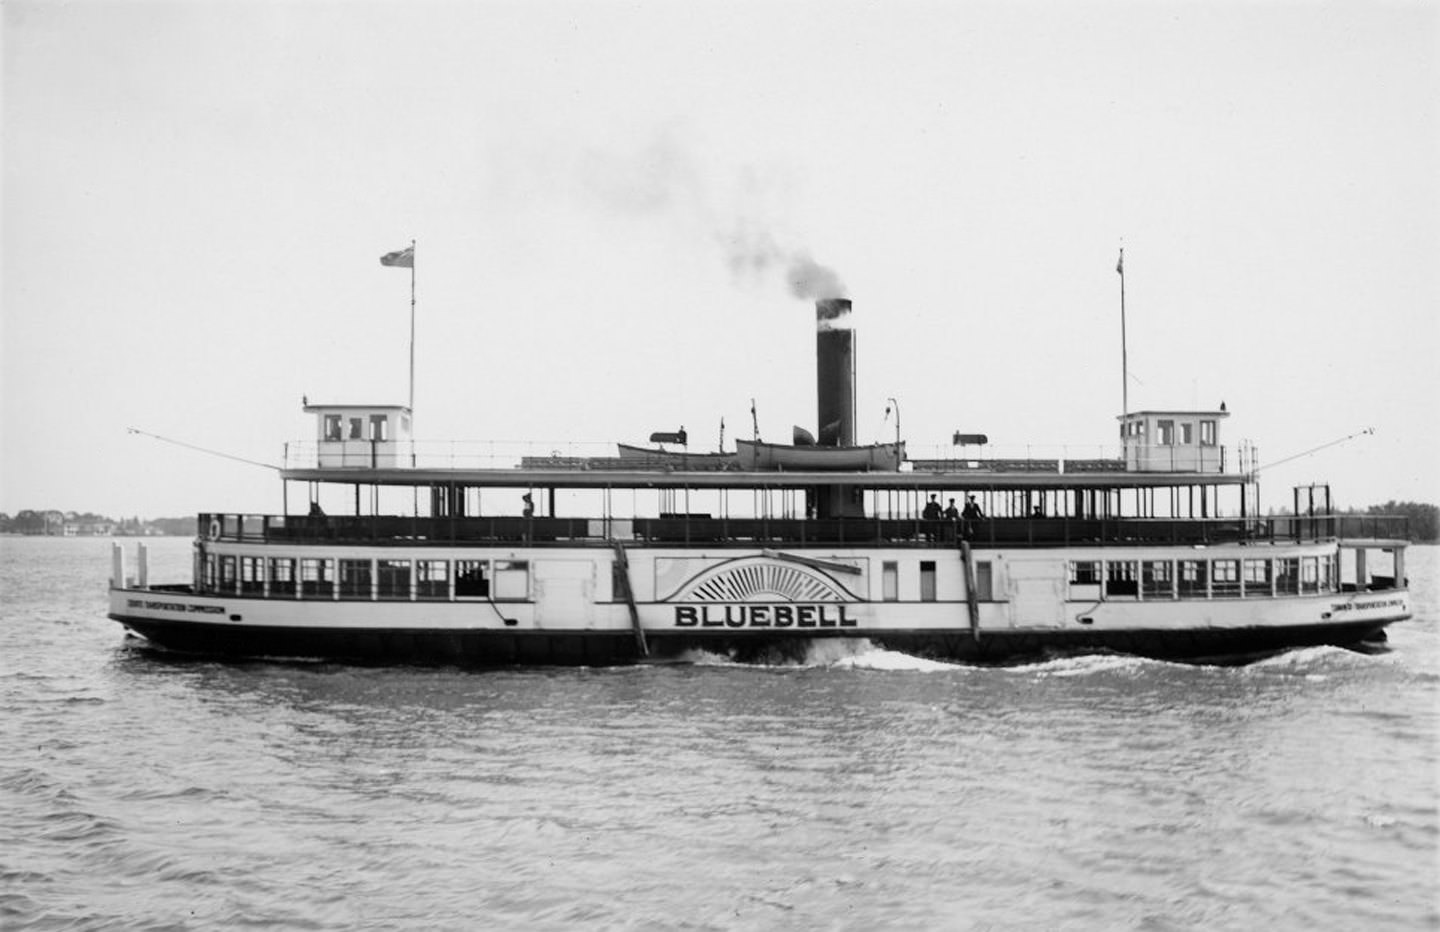 Toronto ferry S.S. Bluebell, as photographed by Alfred Pearson, June 6, 1927.